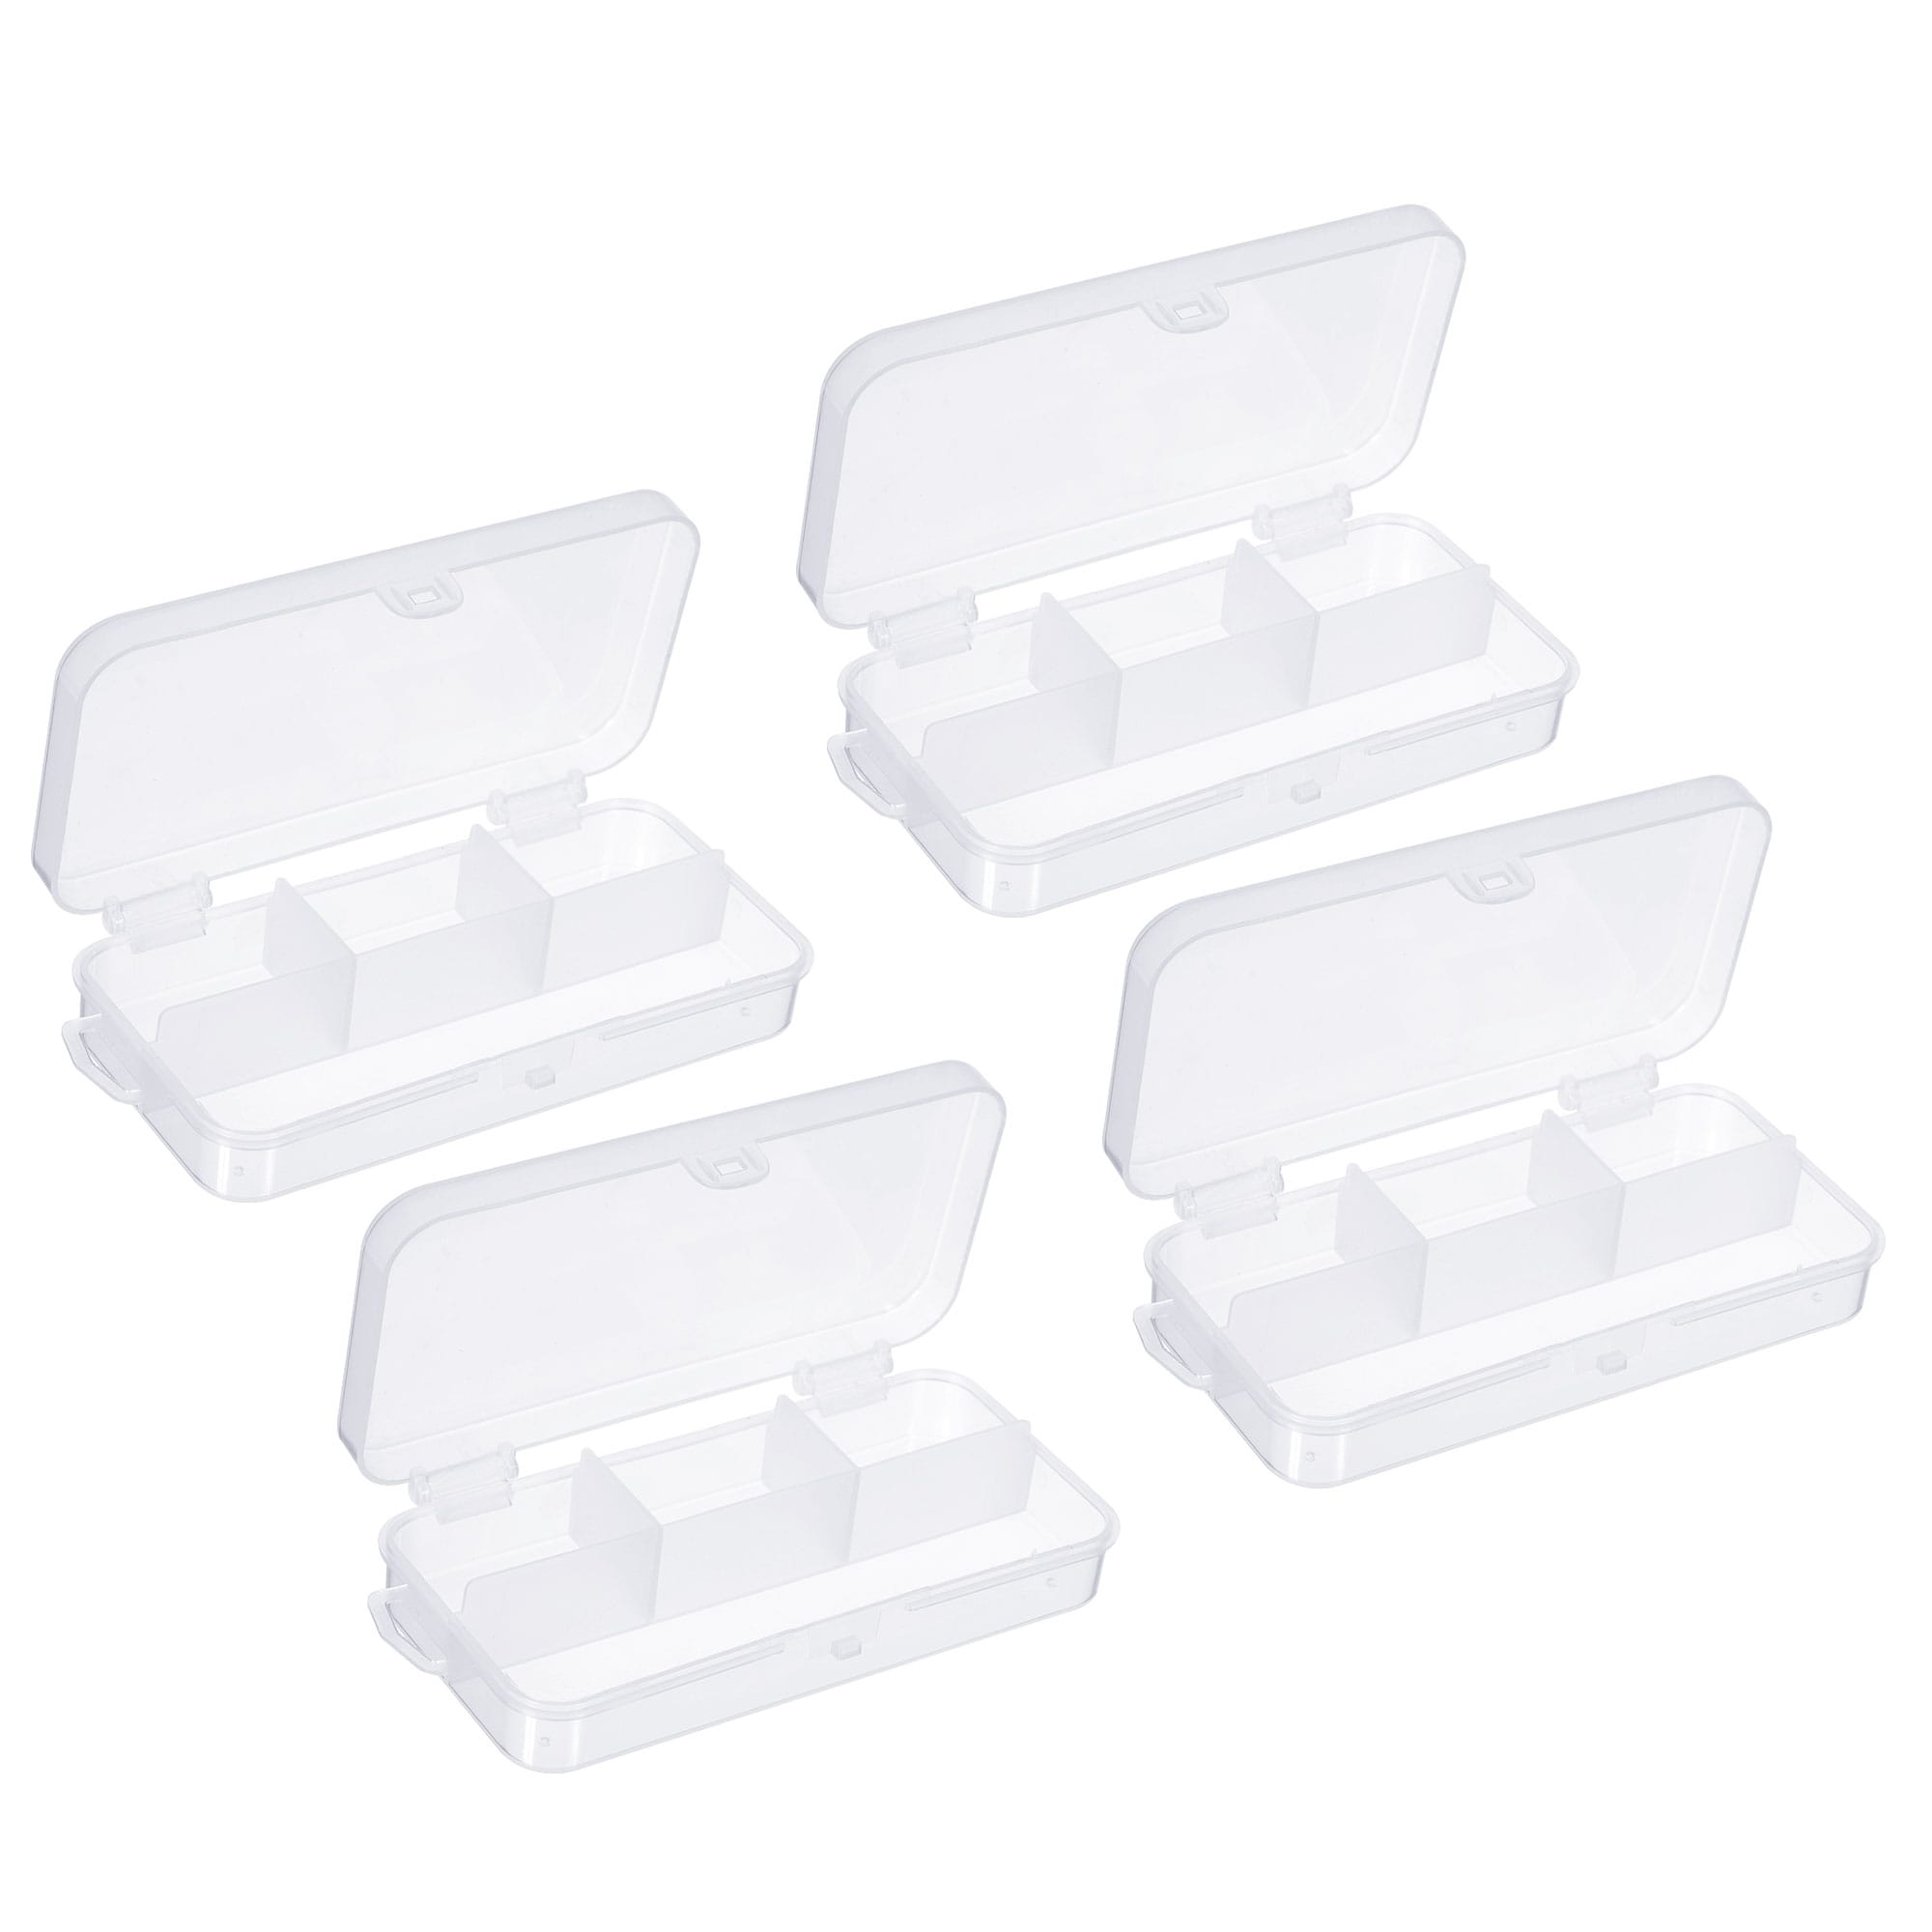 4pcs Fishing Tackle Utility Box Lure Bait Hooks Plastic Storage Container, Clear - 4.9 x 2.4 x 1 inch